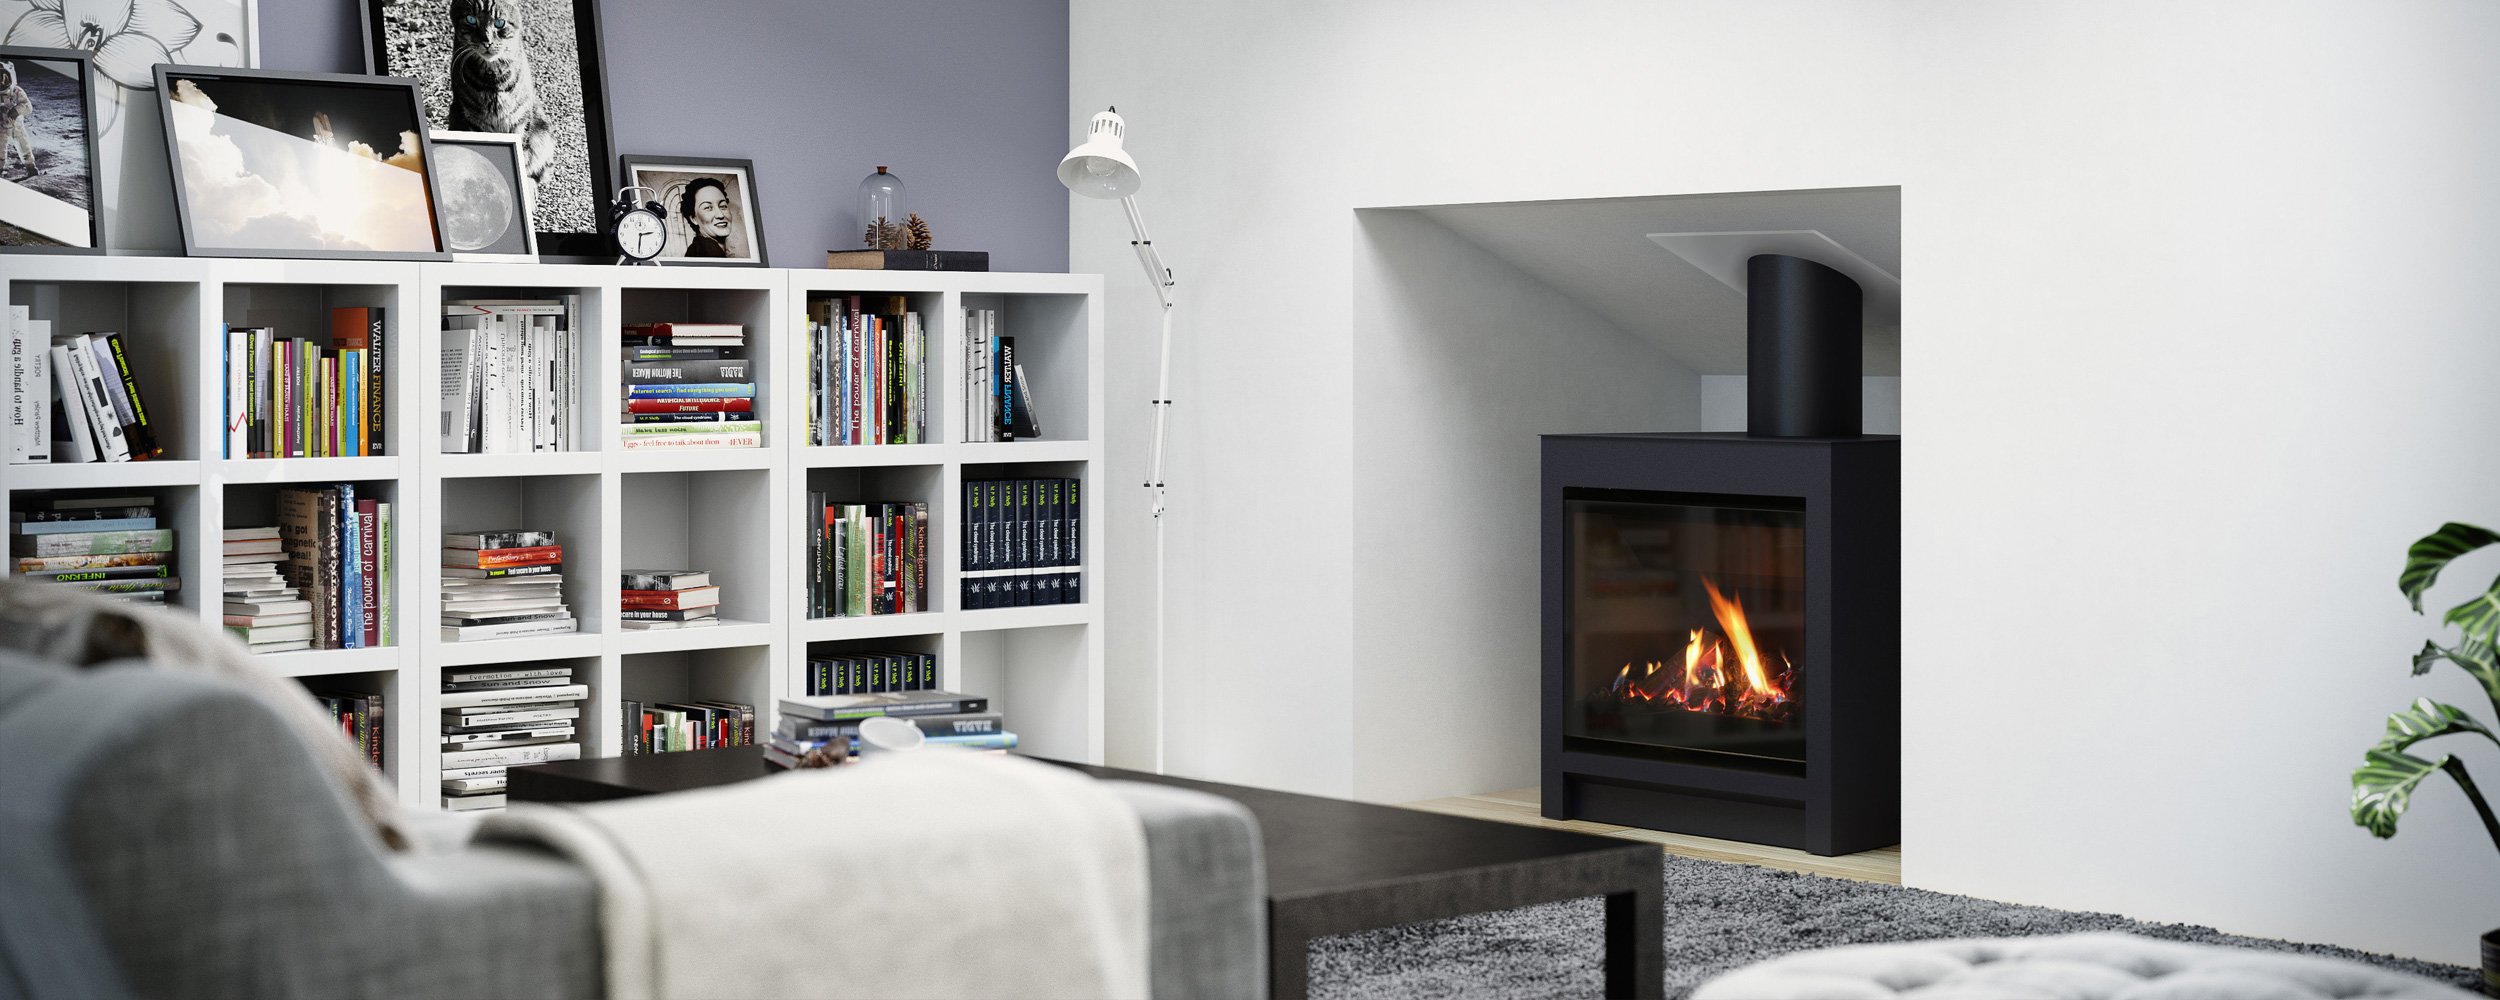 Cozy white room with a grey couch, filled white bookshelf, and a built in cubby that holds a large freestanding black gas fire